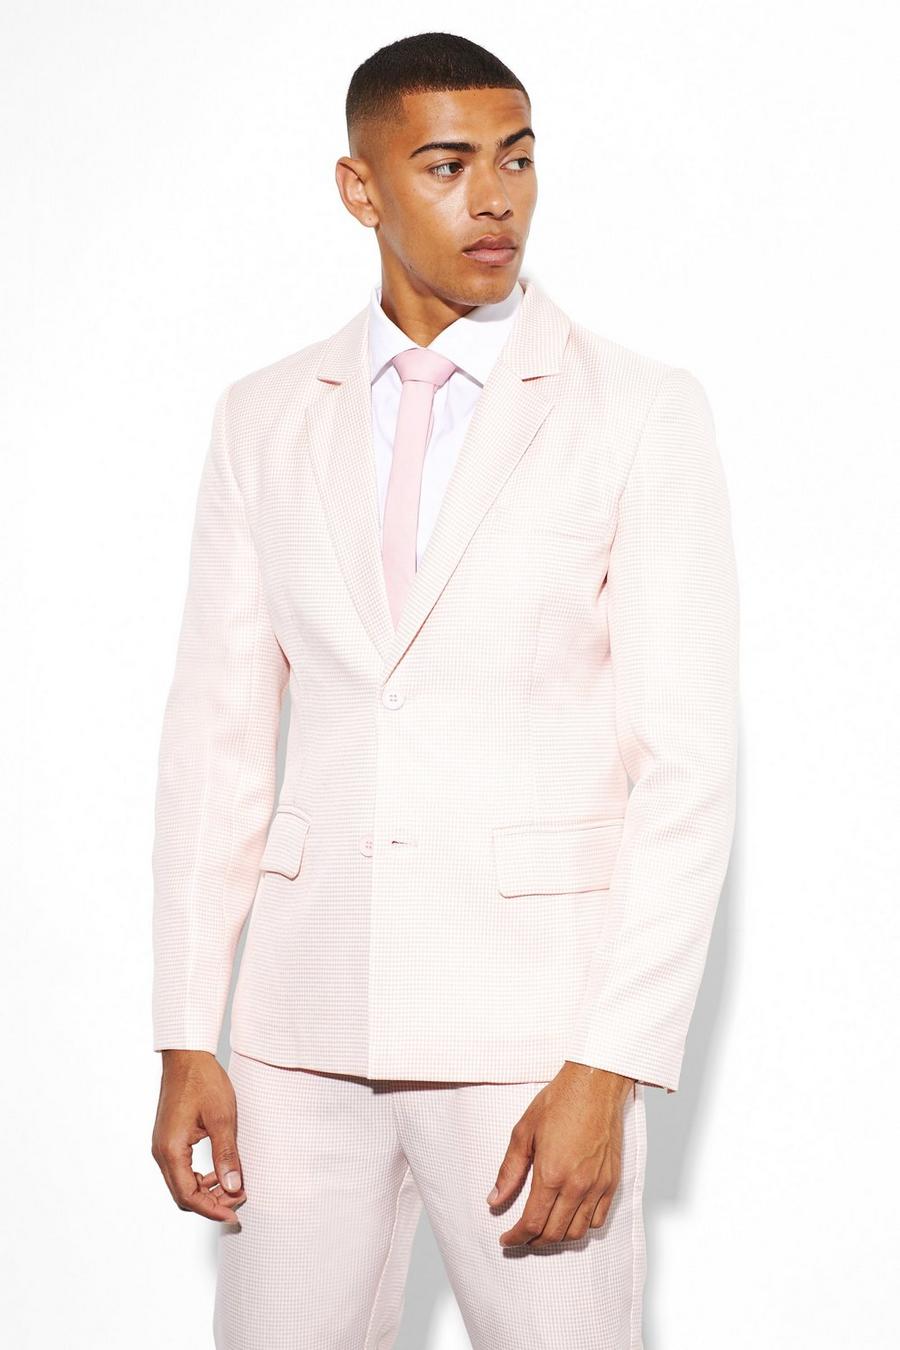 Giacca completo a monopetto Slim Fit in pied-de-poule, Pale pink